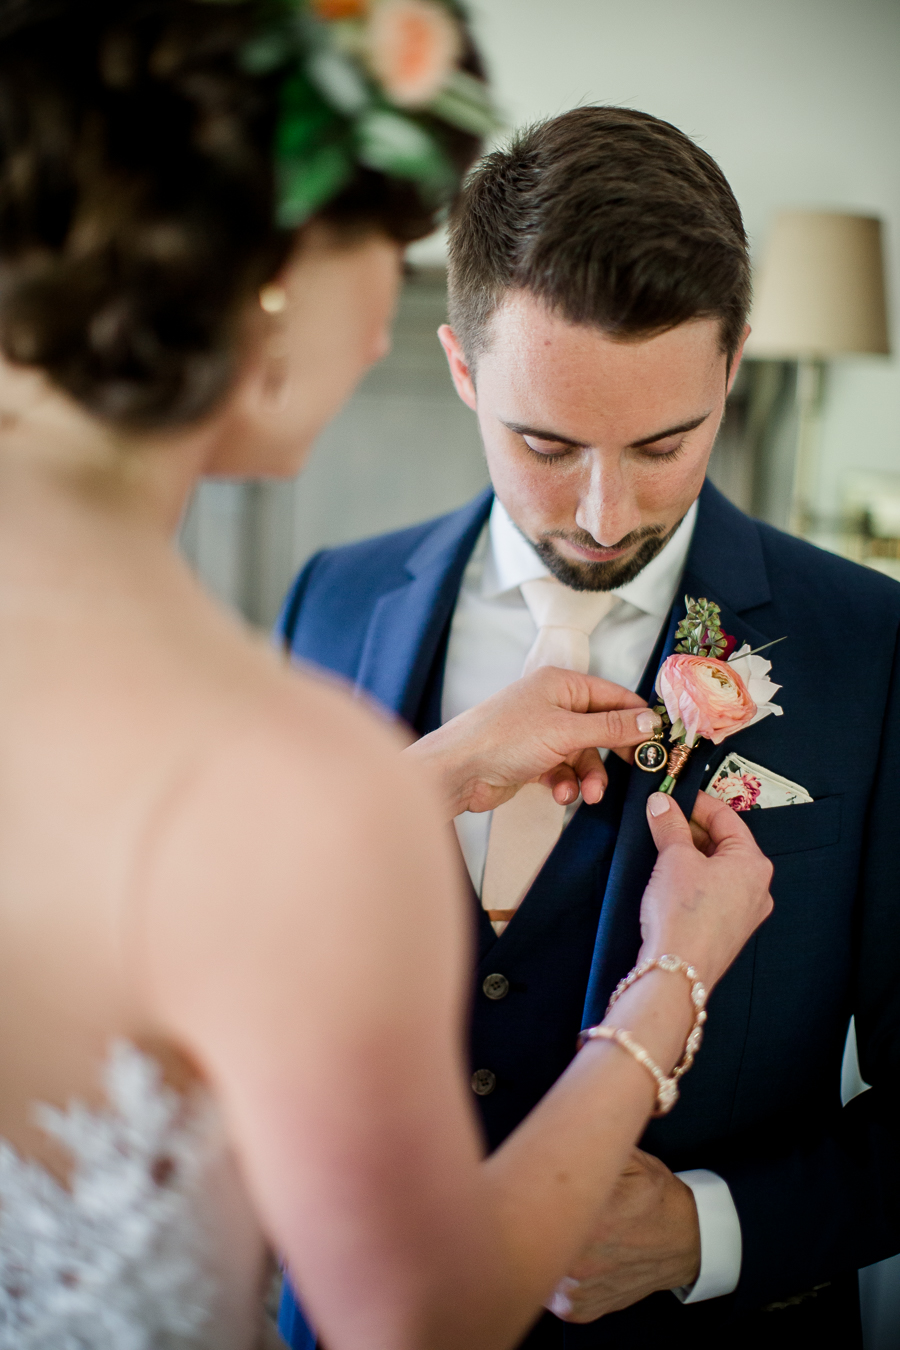 Bride putting flower on Groom at this North Carolina Elopement by Knoxville Wedding Photographer, Amanda May Photos.